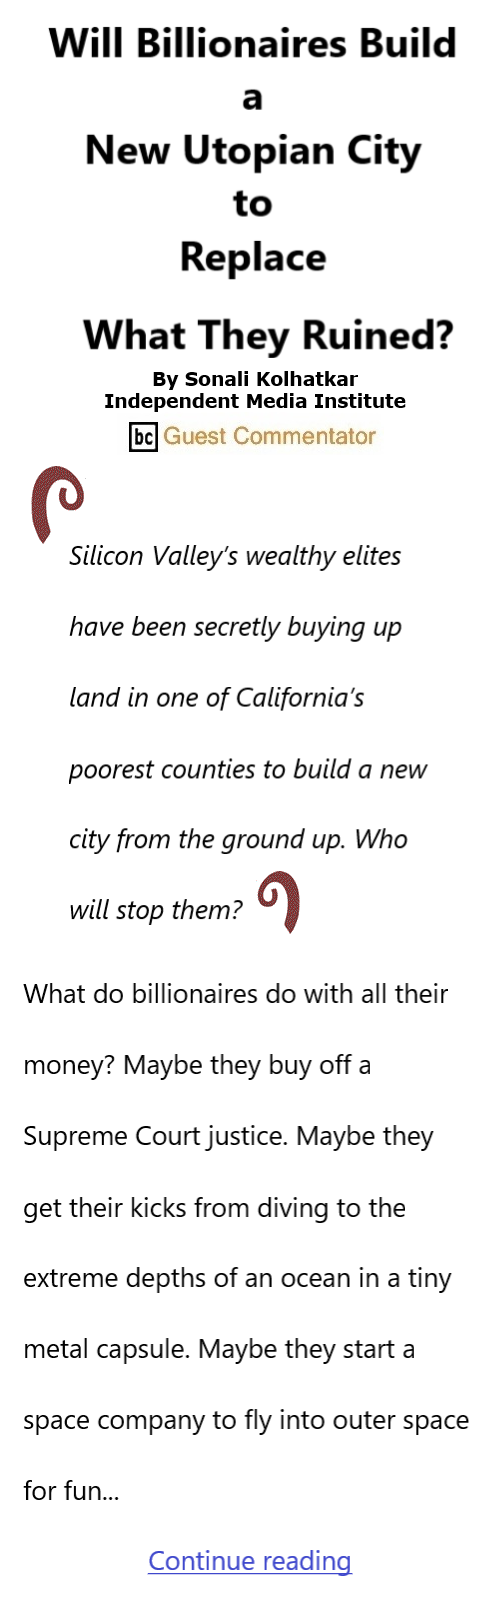 BlackCommentator.com Sept 14, 2023 - Issue 969: Will Billionaires Build a New Utopian City—to Replace What They Ruined? By Sonali Kolhatkar, Independent Media Institute, BC Guest Commentator